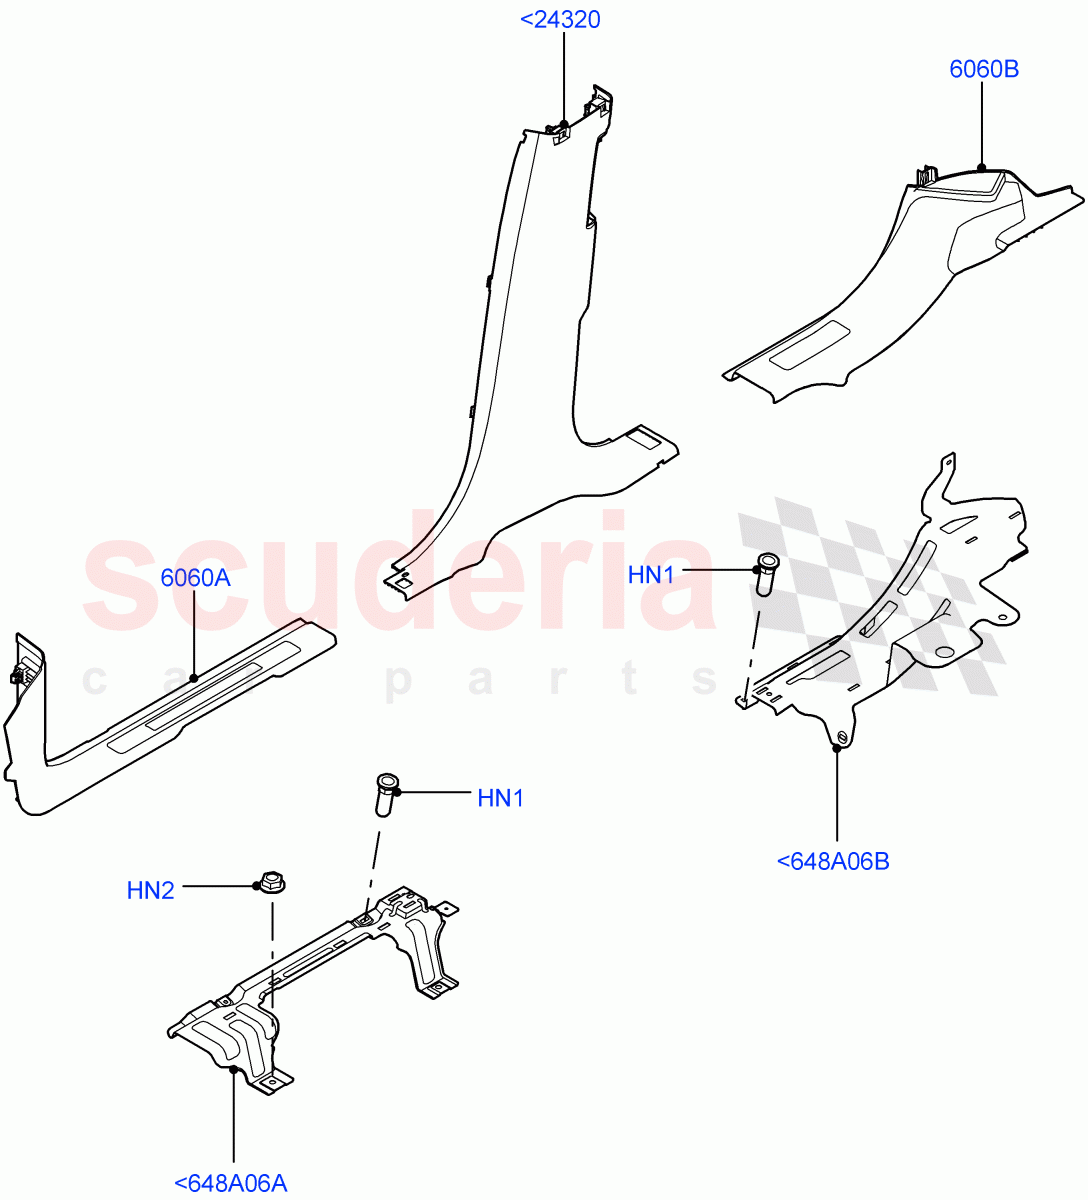 Side Trim(Sill)(Itatiaia (Brazil))((V)FROMGT000001) of Land Rover Land Rover Discovery Sport (2015+) [2.2 Single Turbo Diesel]